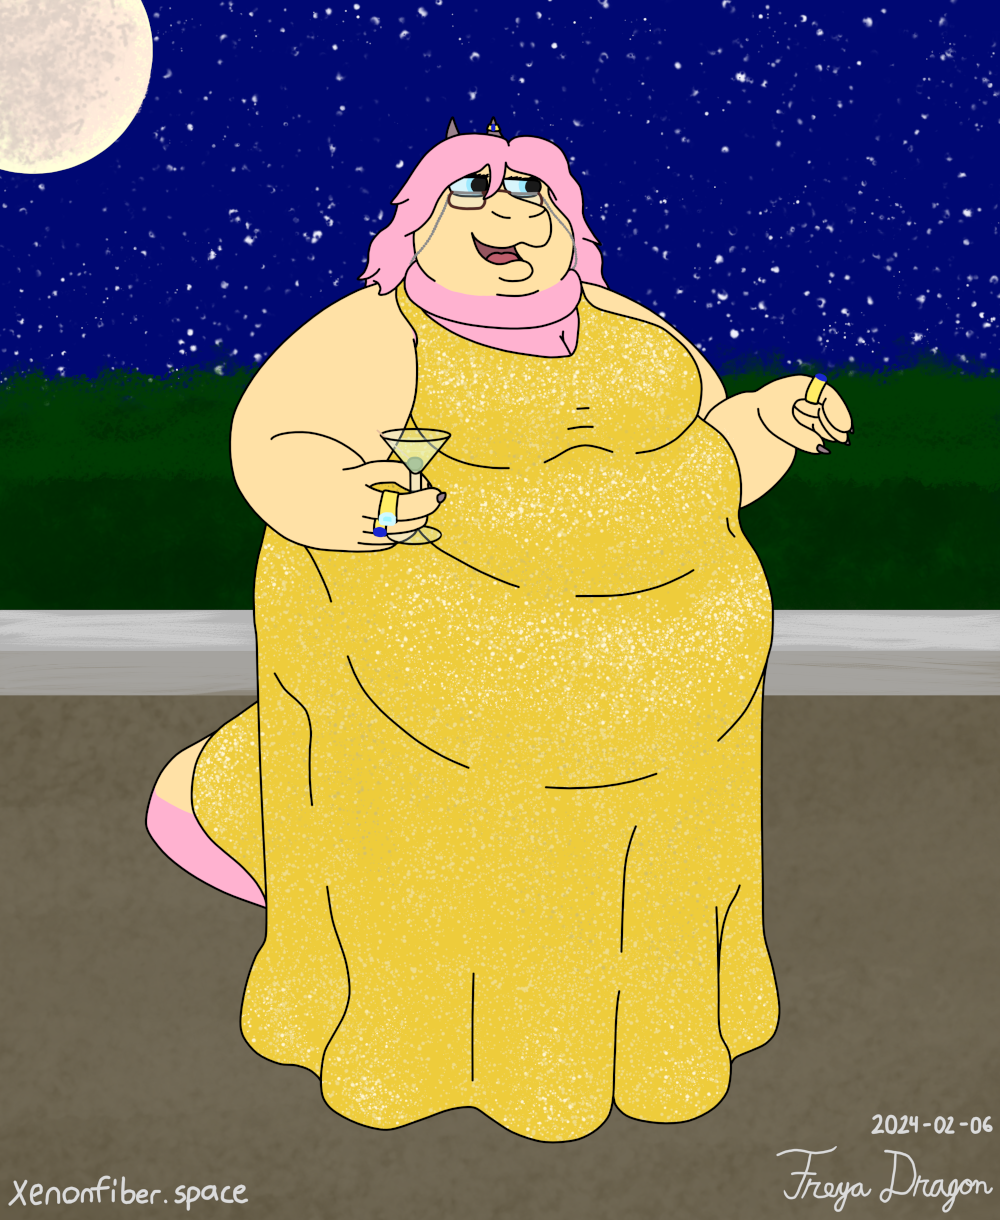 A drawing of a proudly obese dragoness. She is wearing a sequined, golden, floor-length dress and holding a martini. She has reading glasses with a chain and an assortment of gold jewelry with diamond and sapphire gemstones. She appears to be in conversation. The background consists of a maintained line of bushes and the night sky with a full moon.